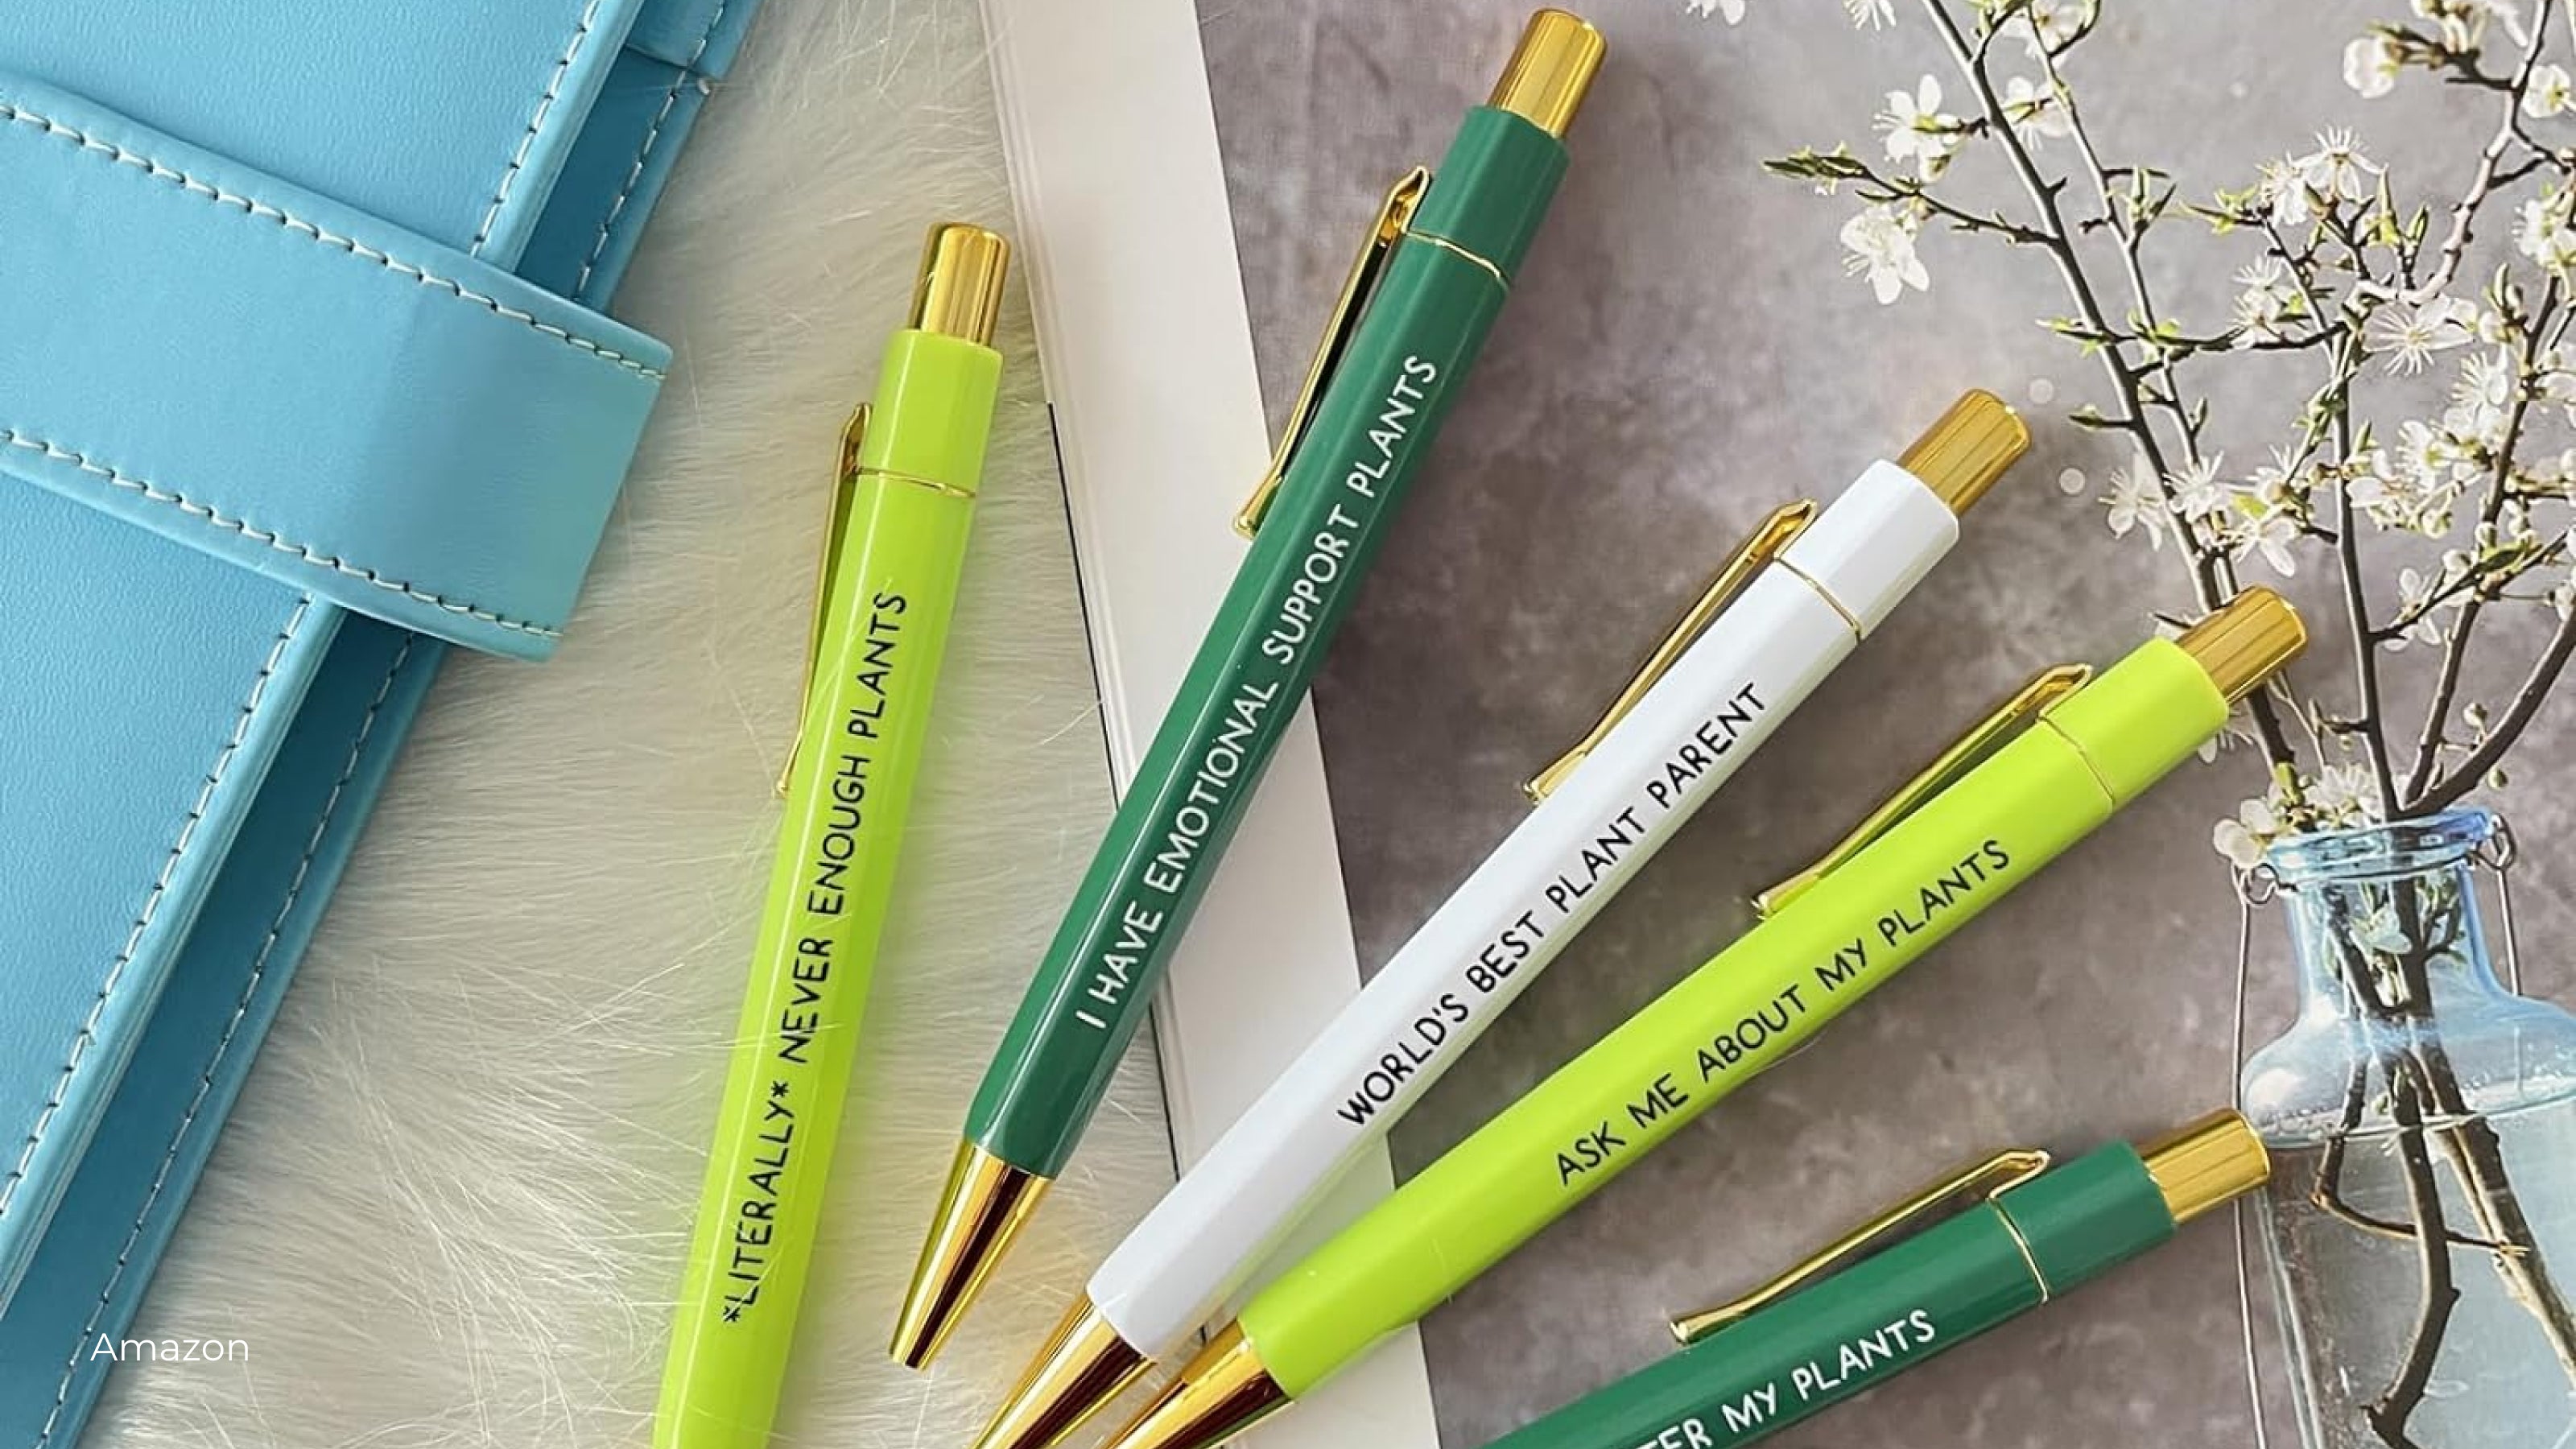 A set of green and white plant saying pens from Amazon